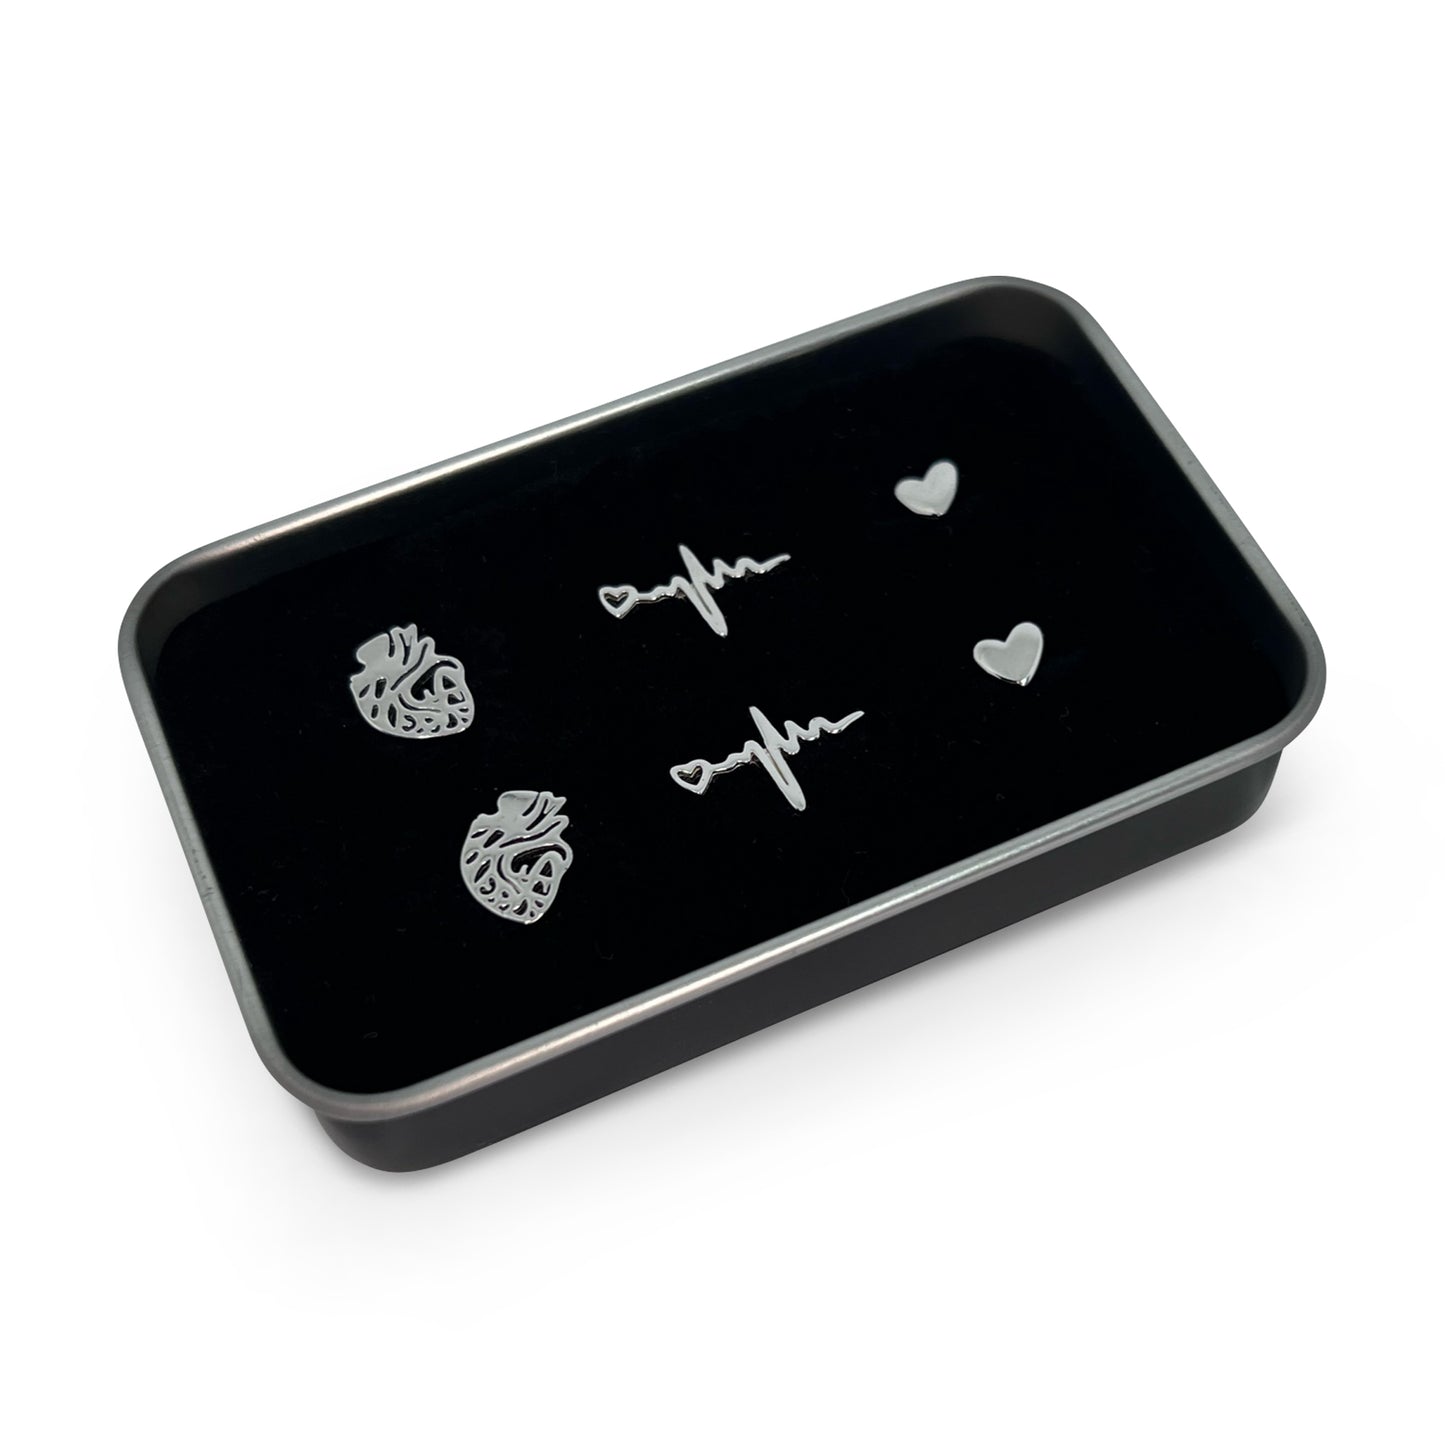 Buy Sistasaidso+ *Limited Edition - Sterling Silver + White Gold Plated* Cardiac Collection Stud Earrings Online - Sistasaidso+